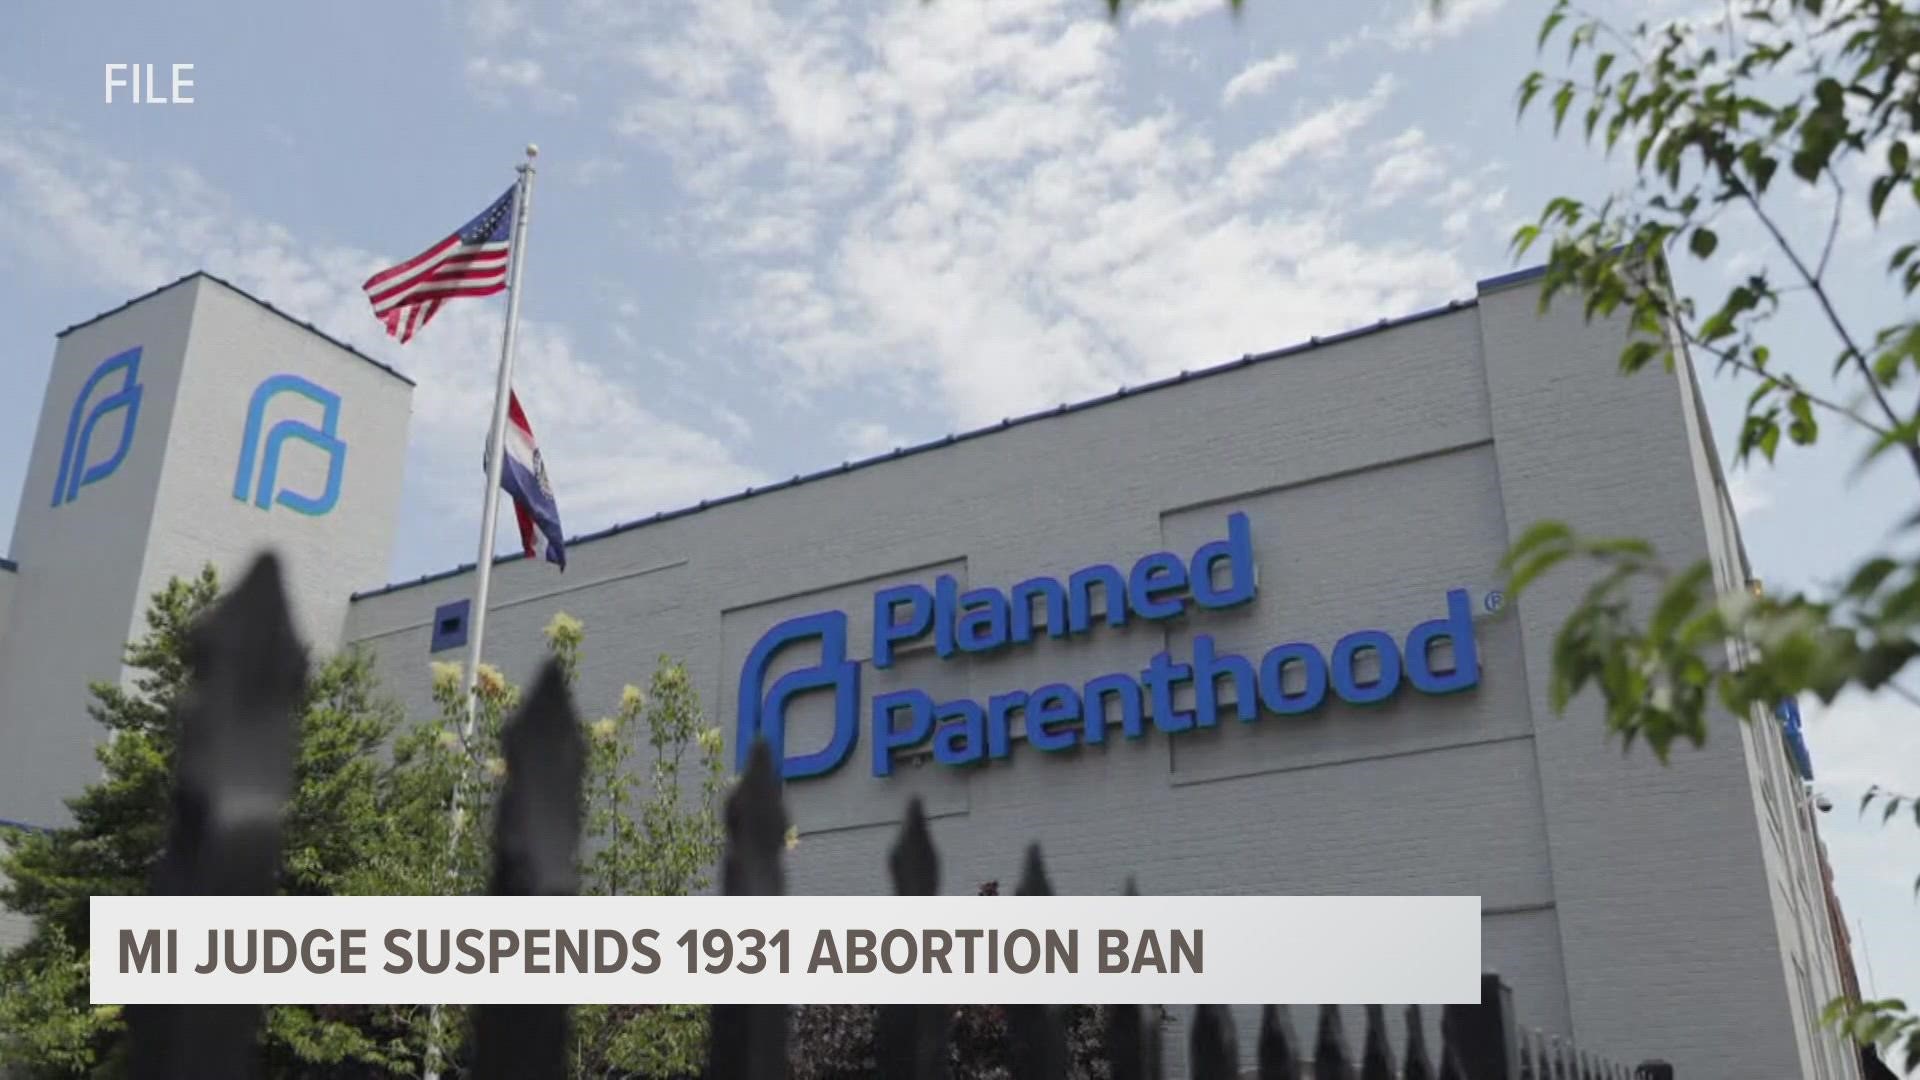 After Planned Parenthood of Michigan was granted a preliminary injunction during their lawsuit, another group is looking at their legal options.